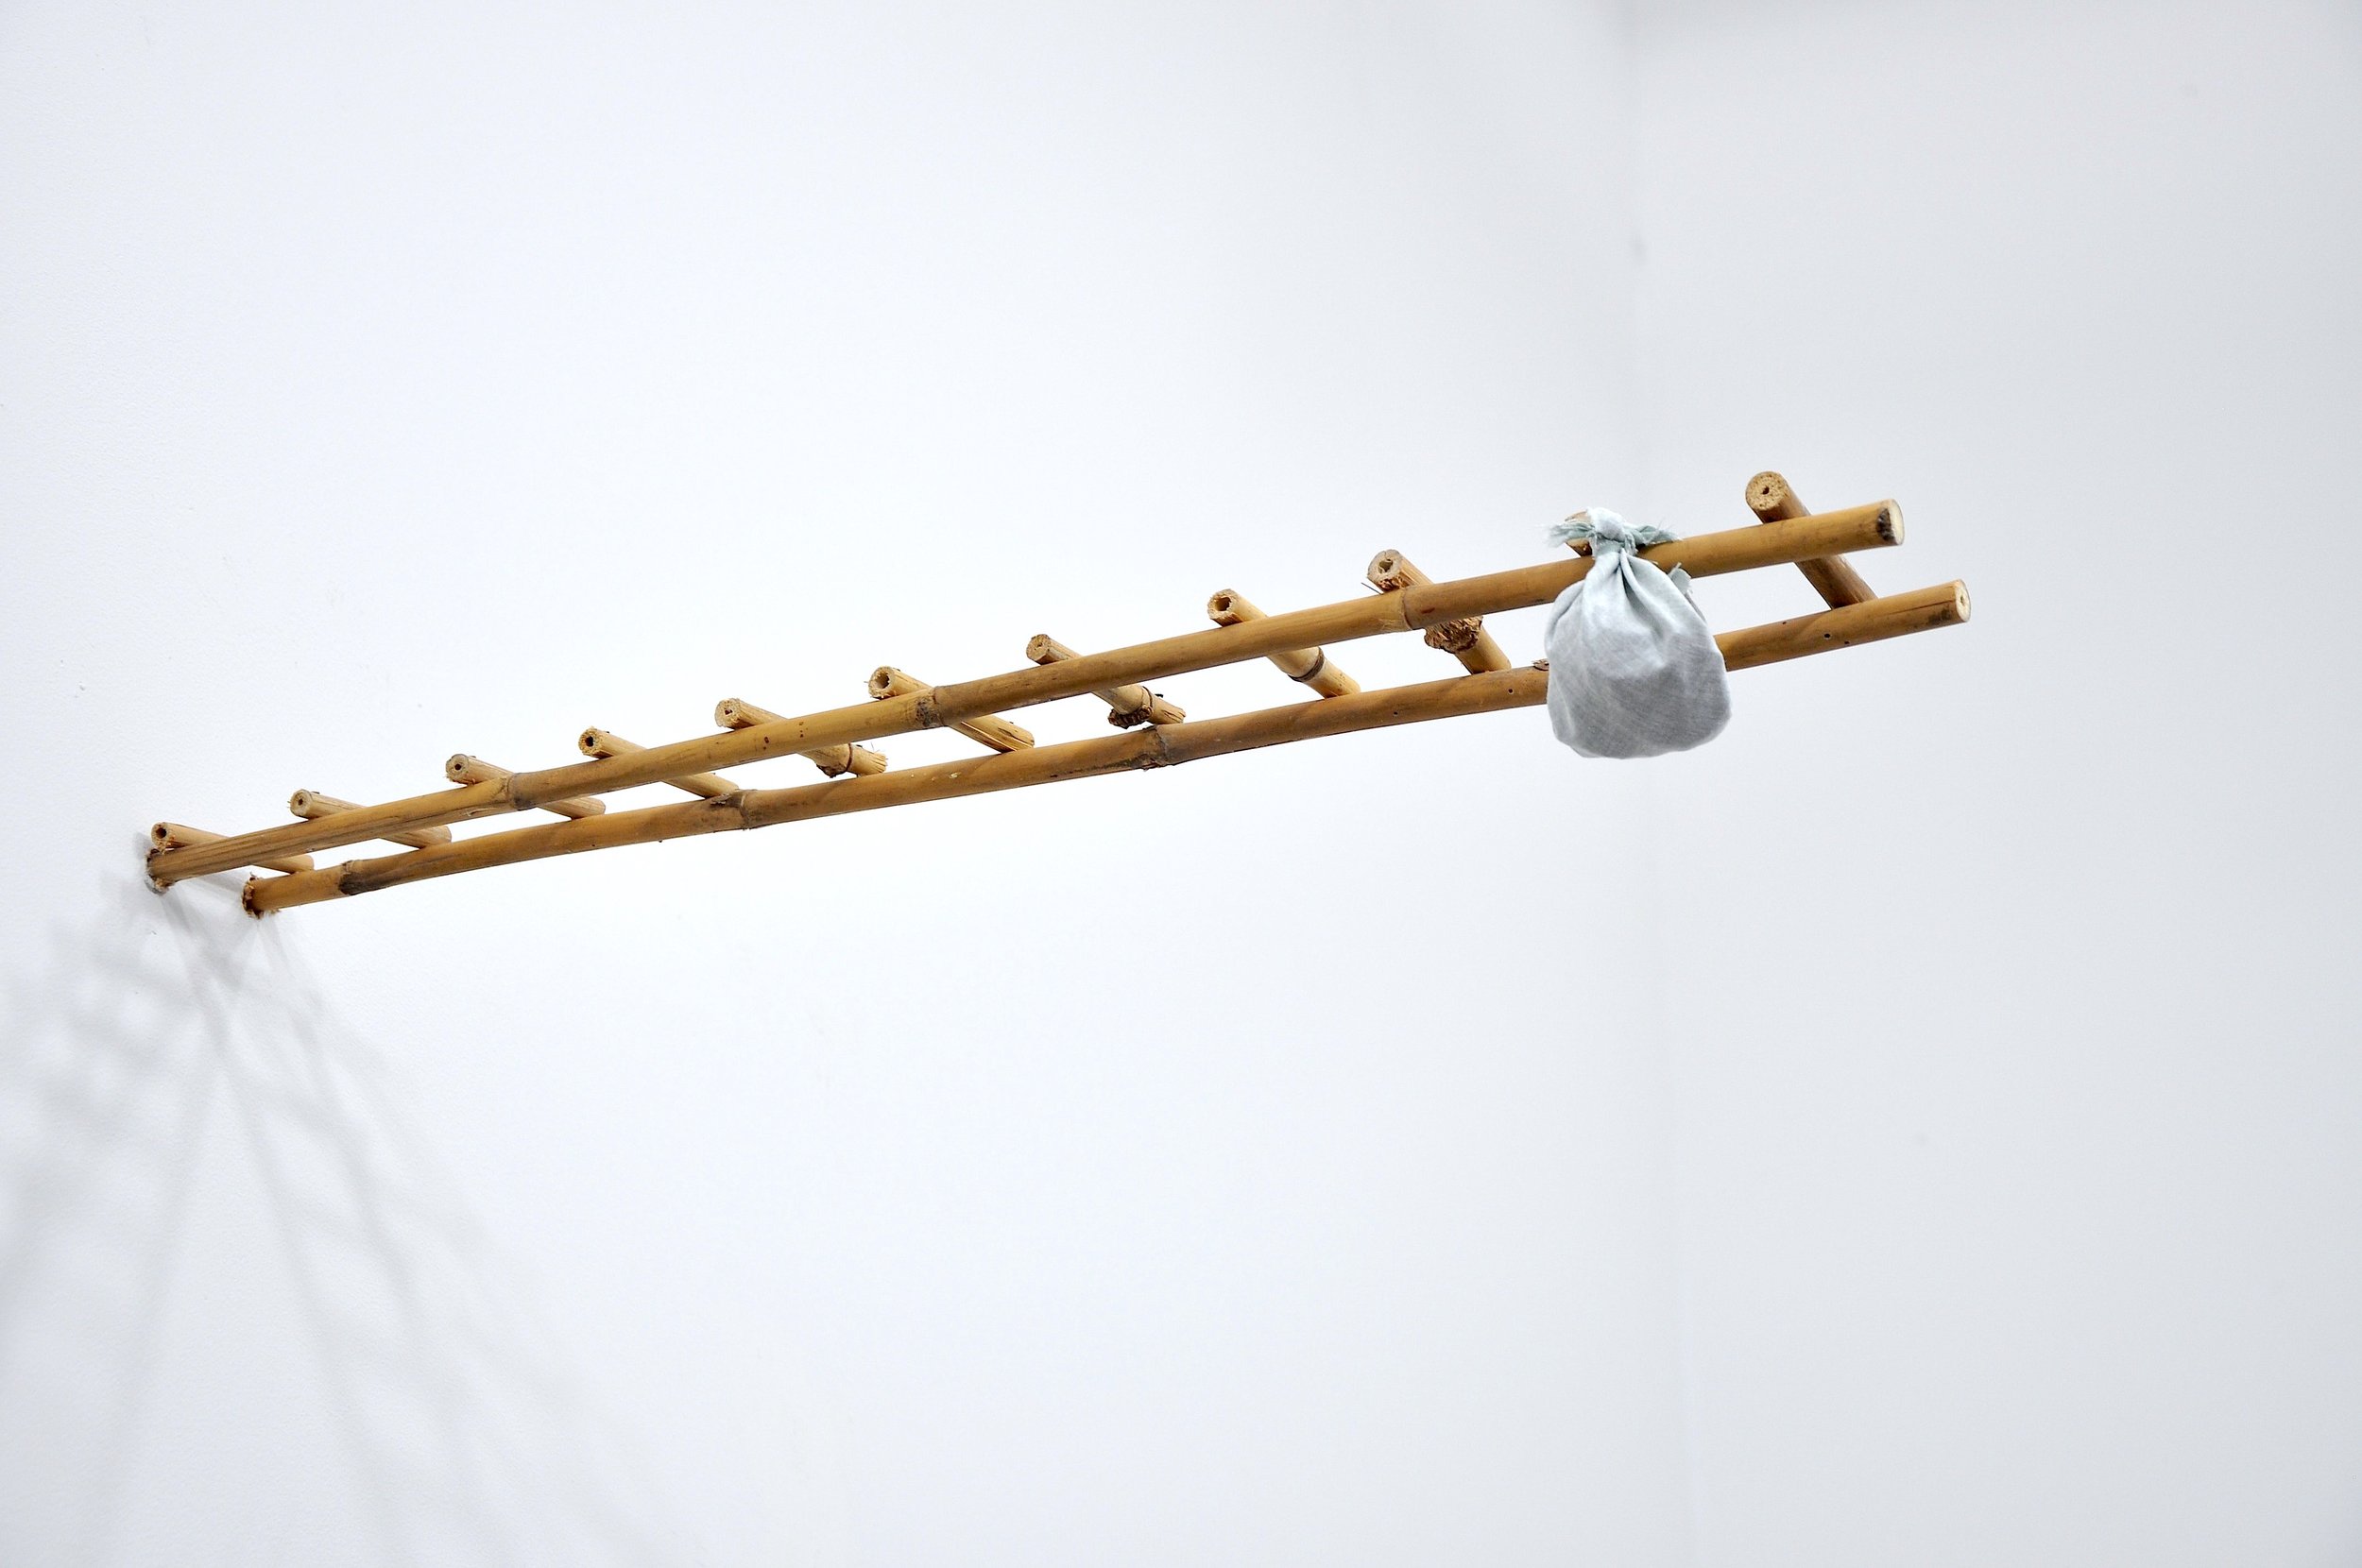   Extract (escape ladder) , 2017, fabricated bamboo ladder toy, cloth, stones, dimensions: variable 